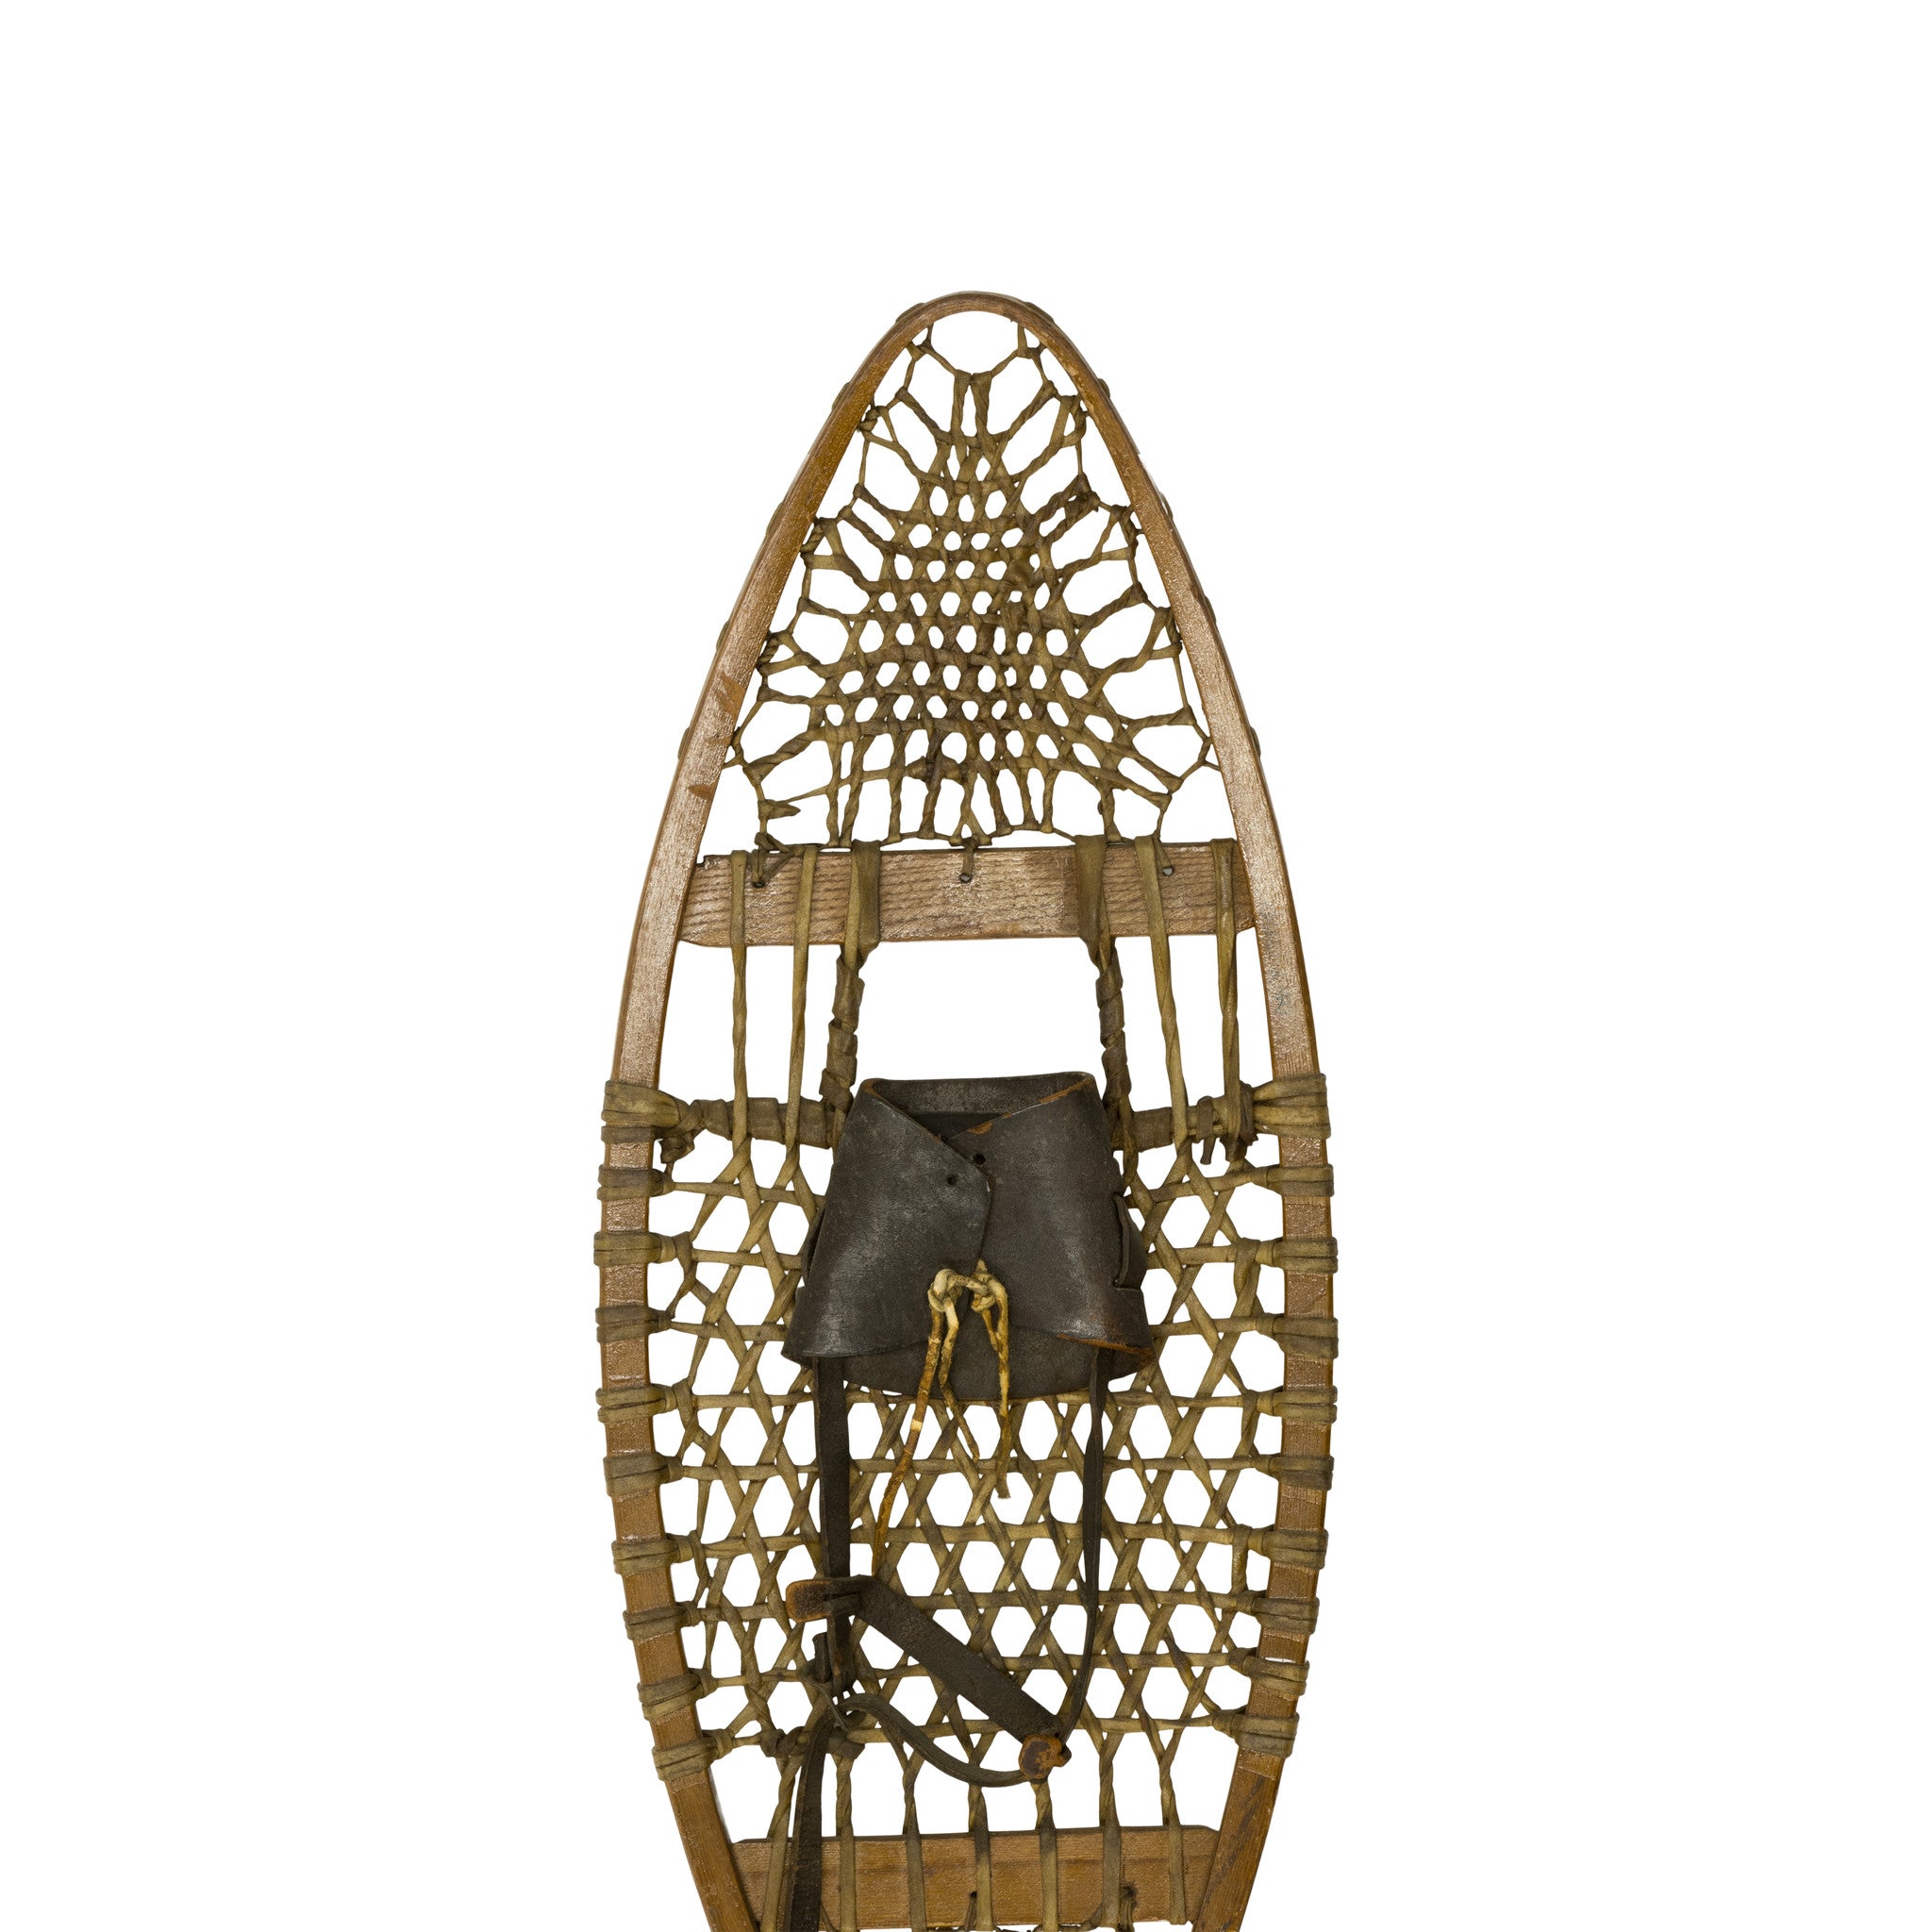 Snowshoes by Northland Ski Mfg.